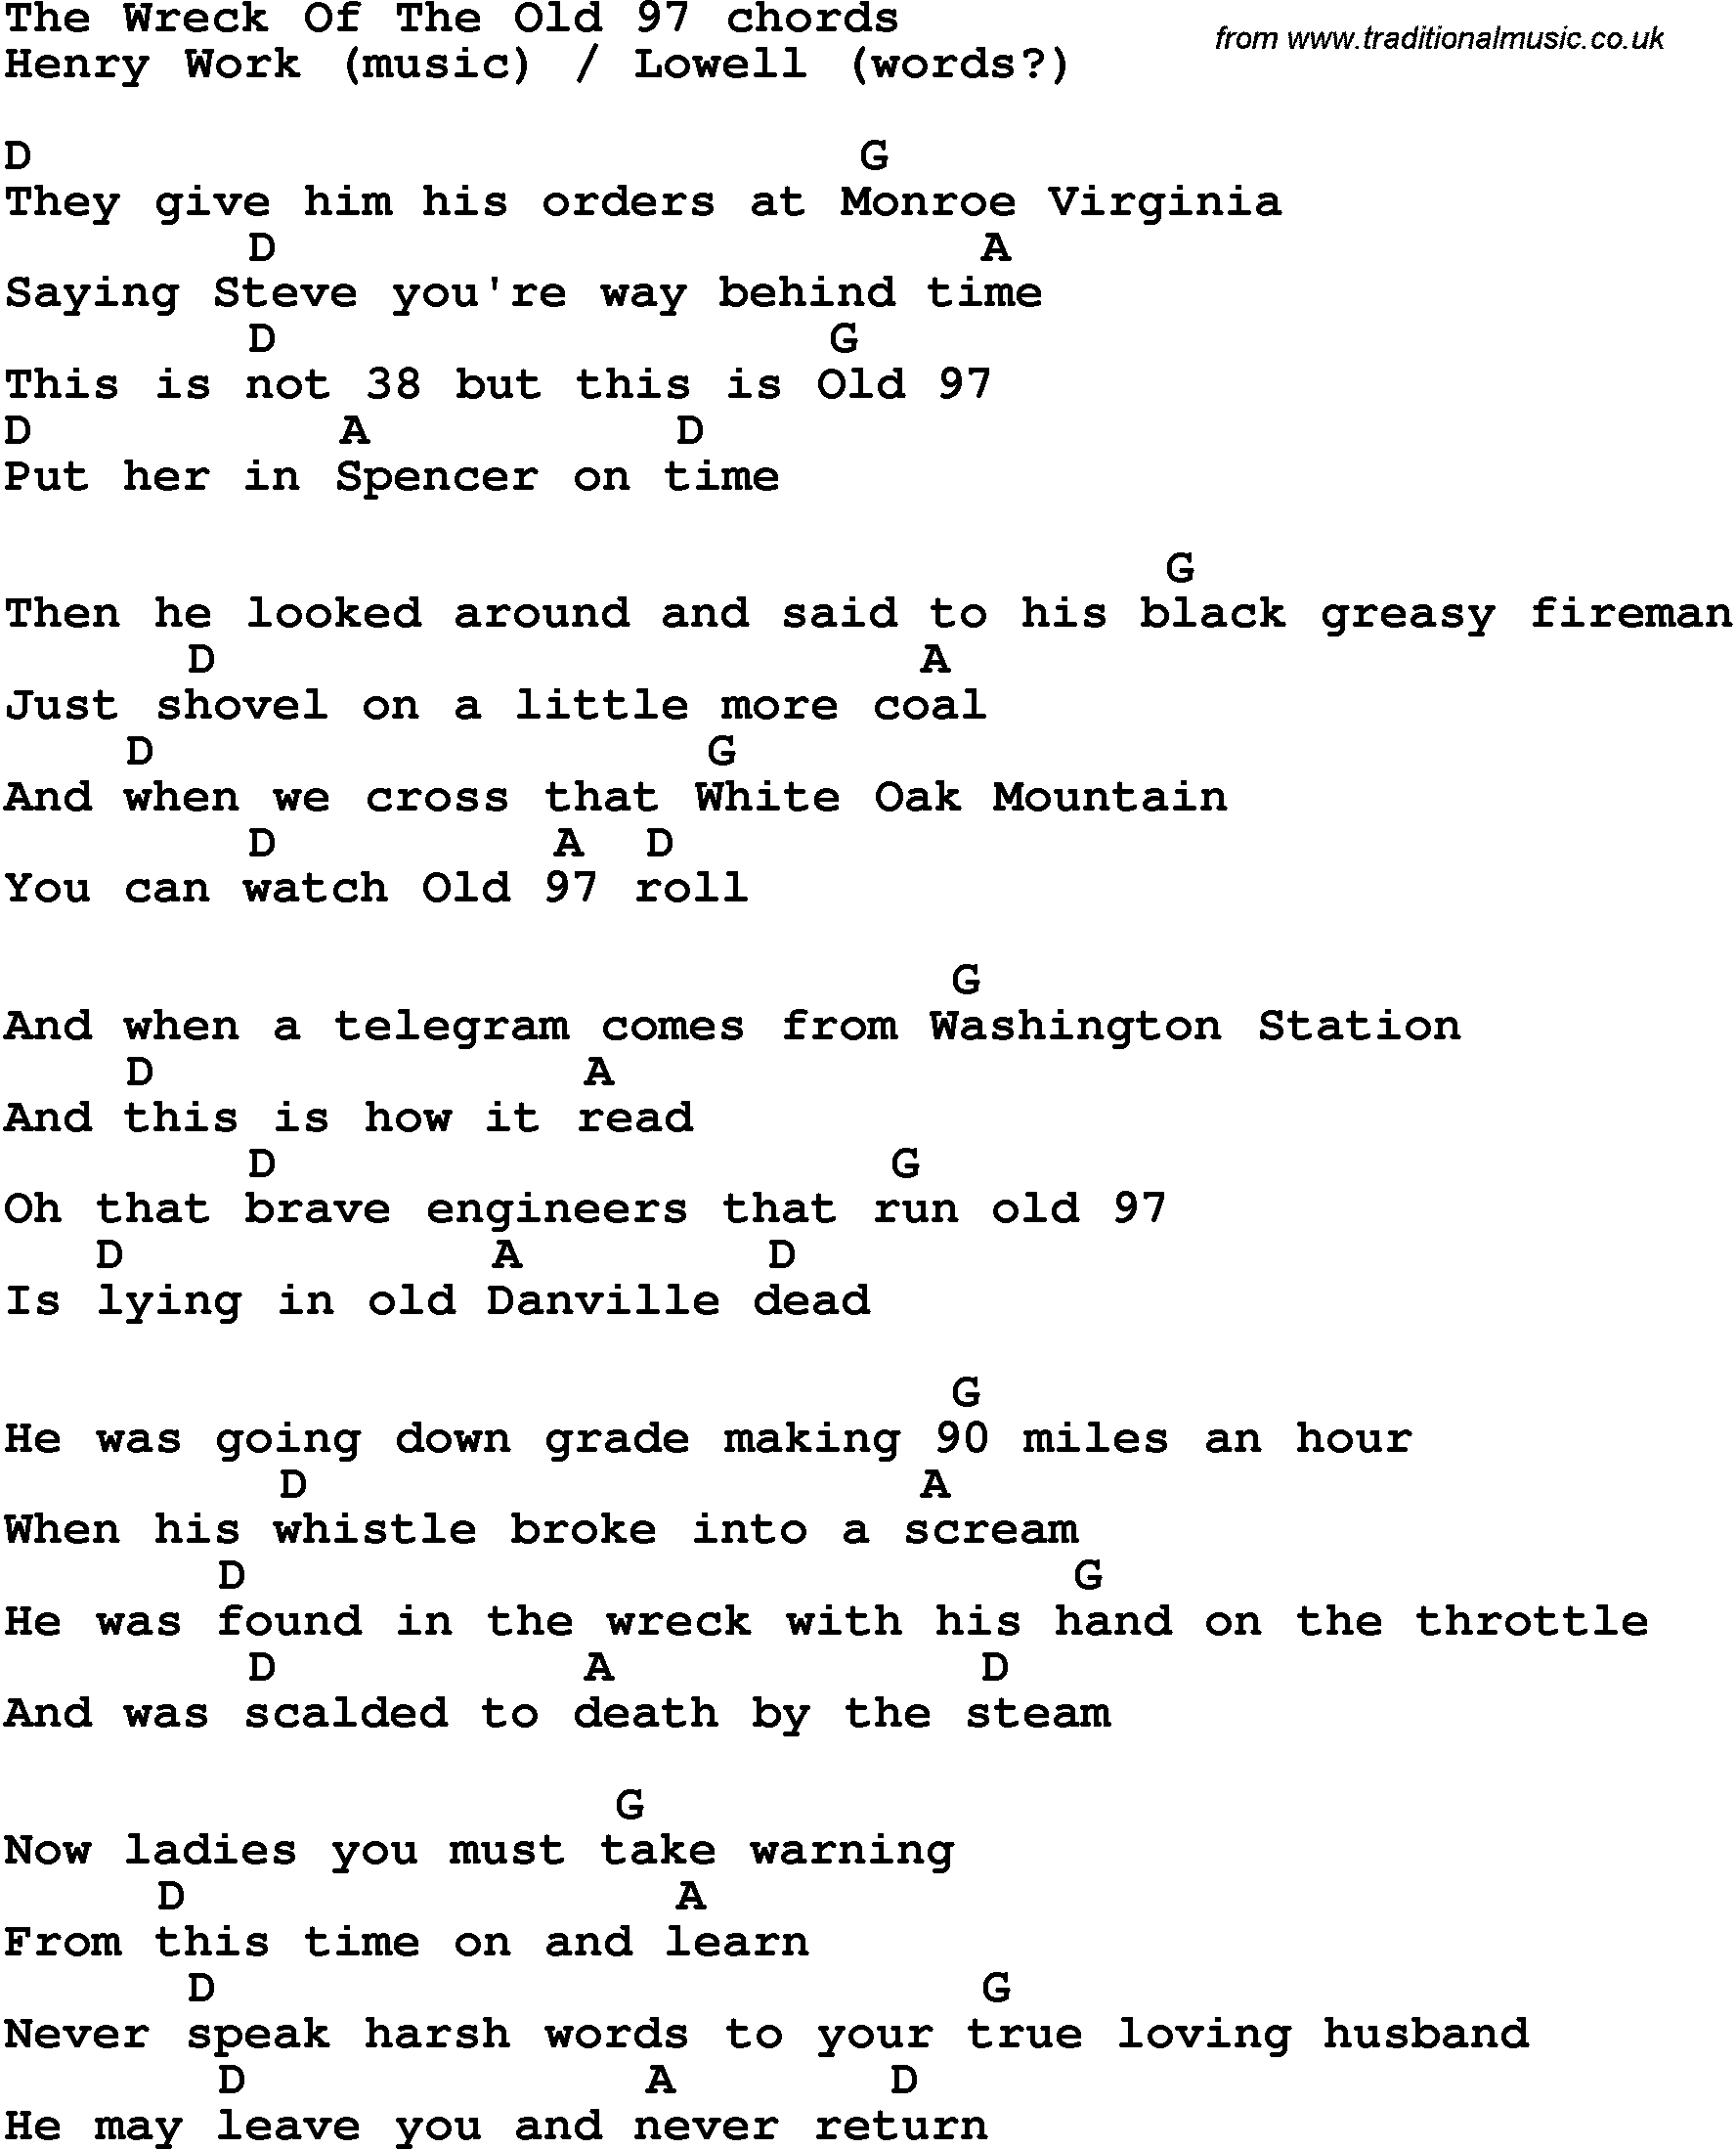 Song Lyrics with guitar chords for The Wreck Of Old 97